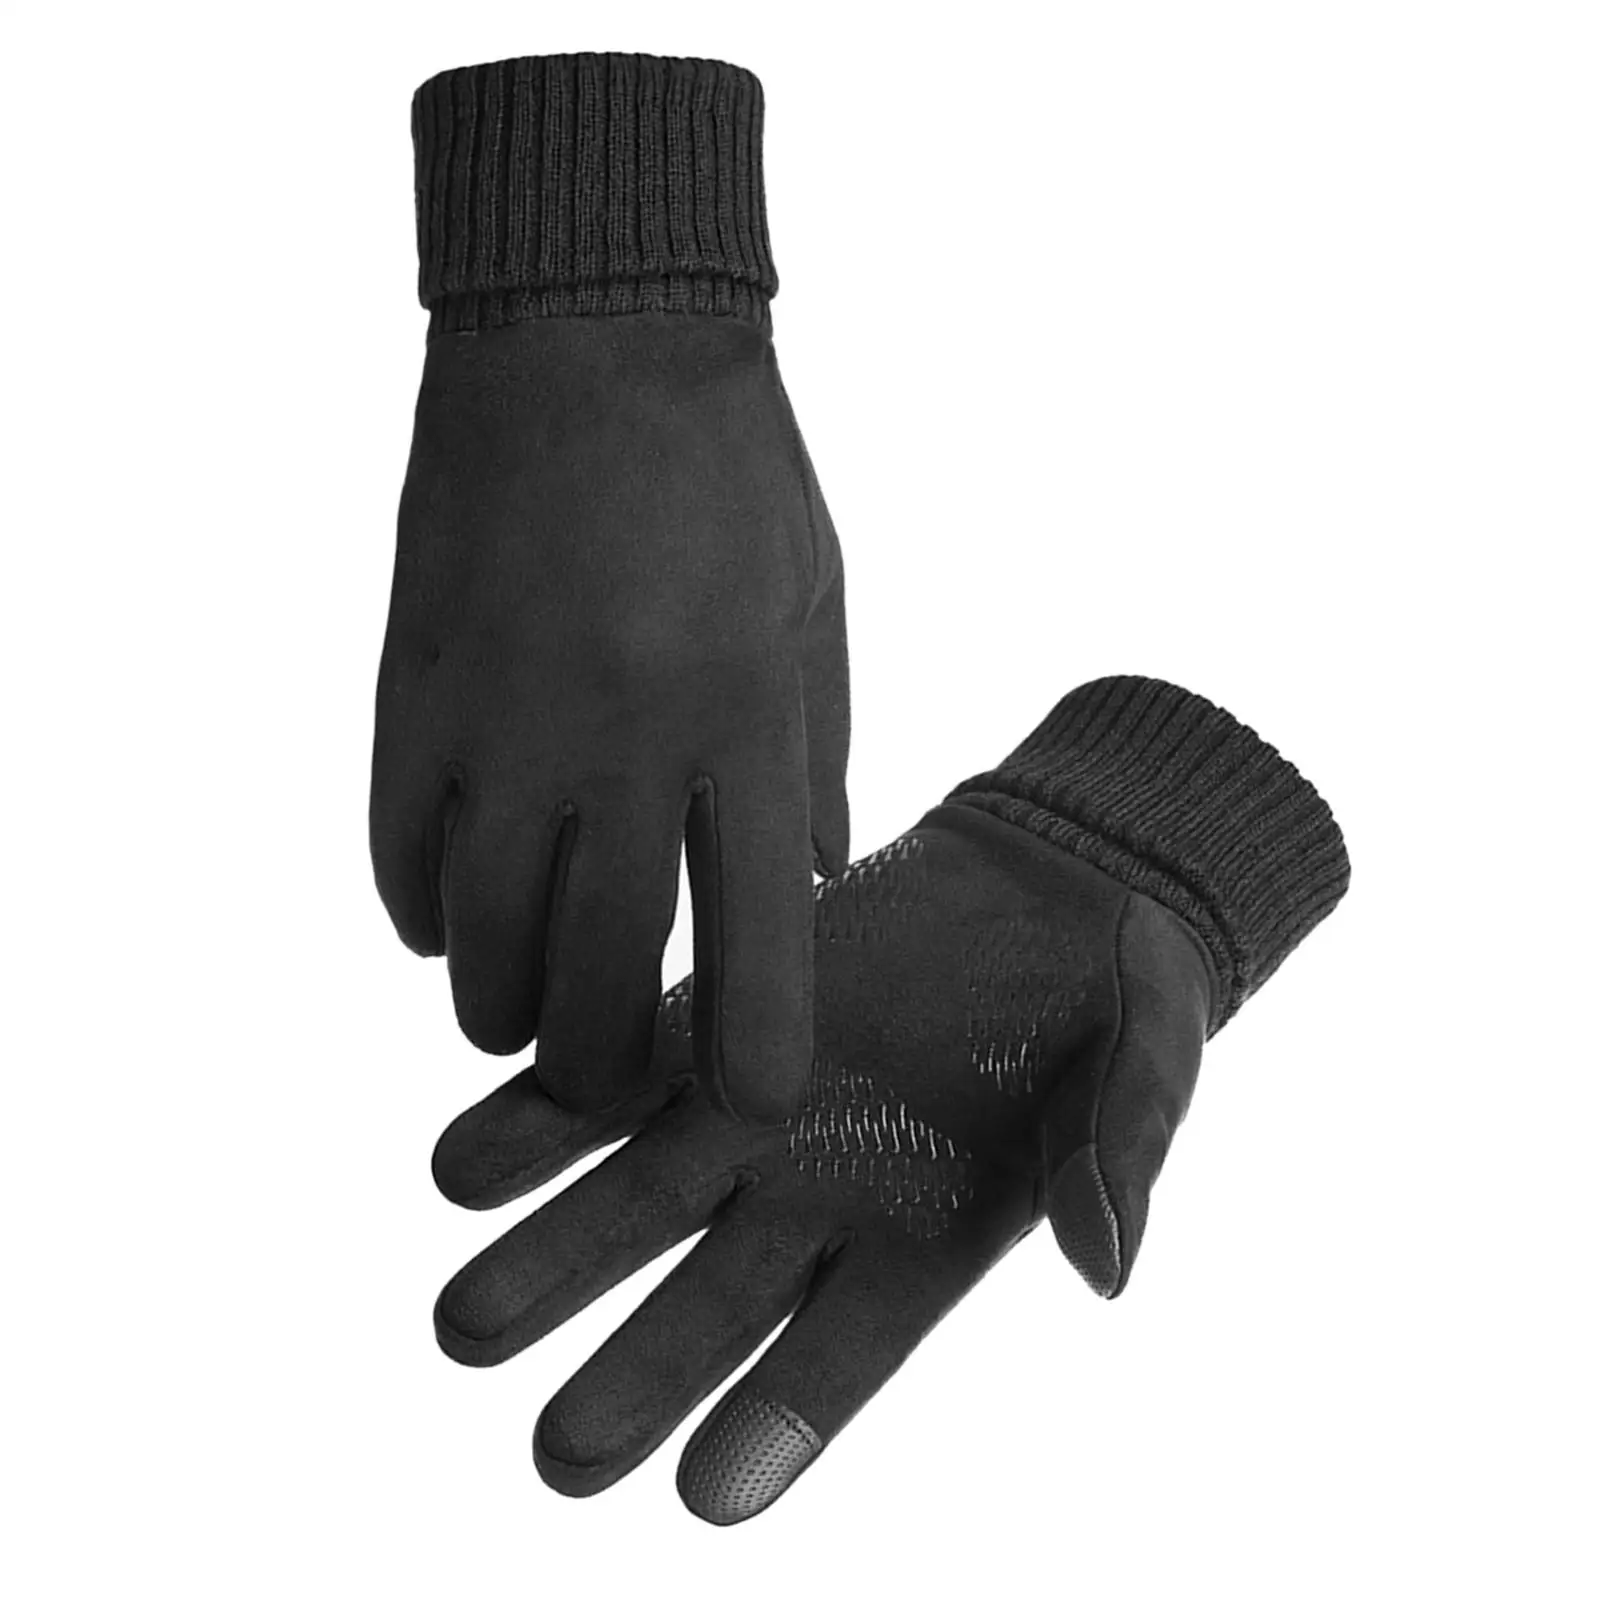 Winter Warm Gloves Mittens Liner Glove Lightweight Full Touch Screen Cycling Gloves Mens Outdoor Activities Sports